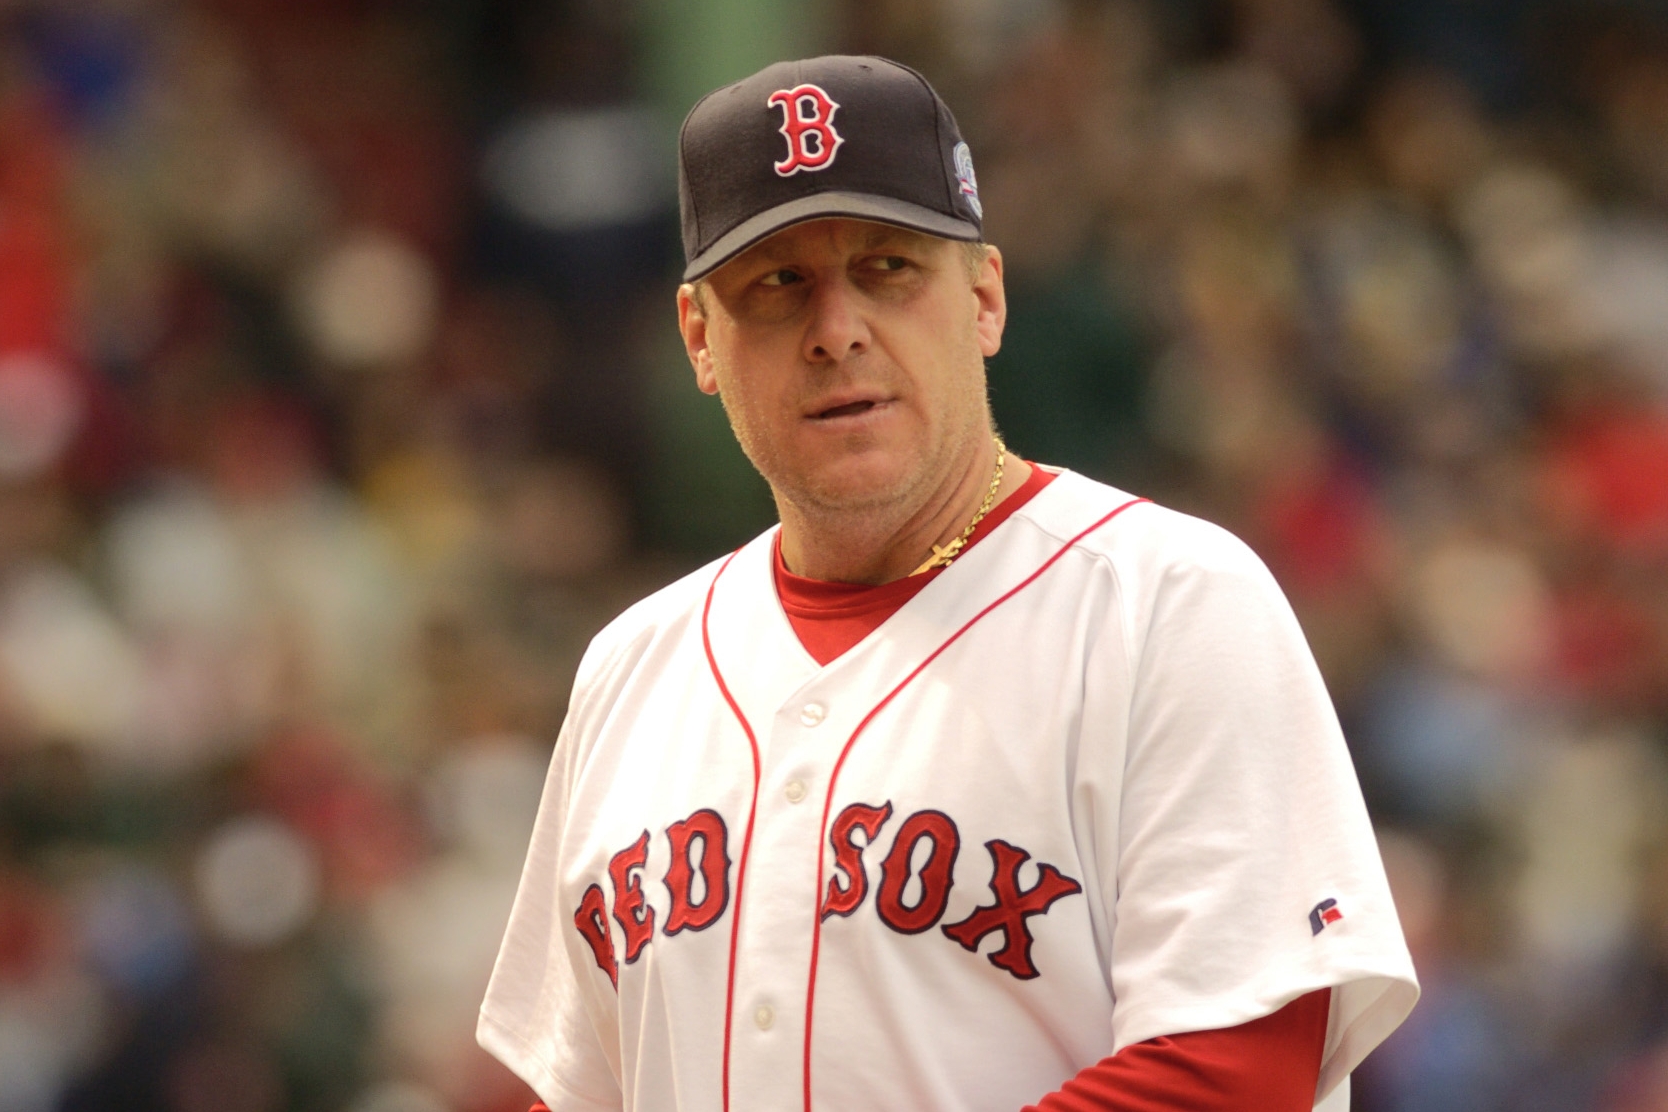 No one elected to Baseball Hall of Fame; Curt Schilling requests